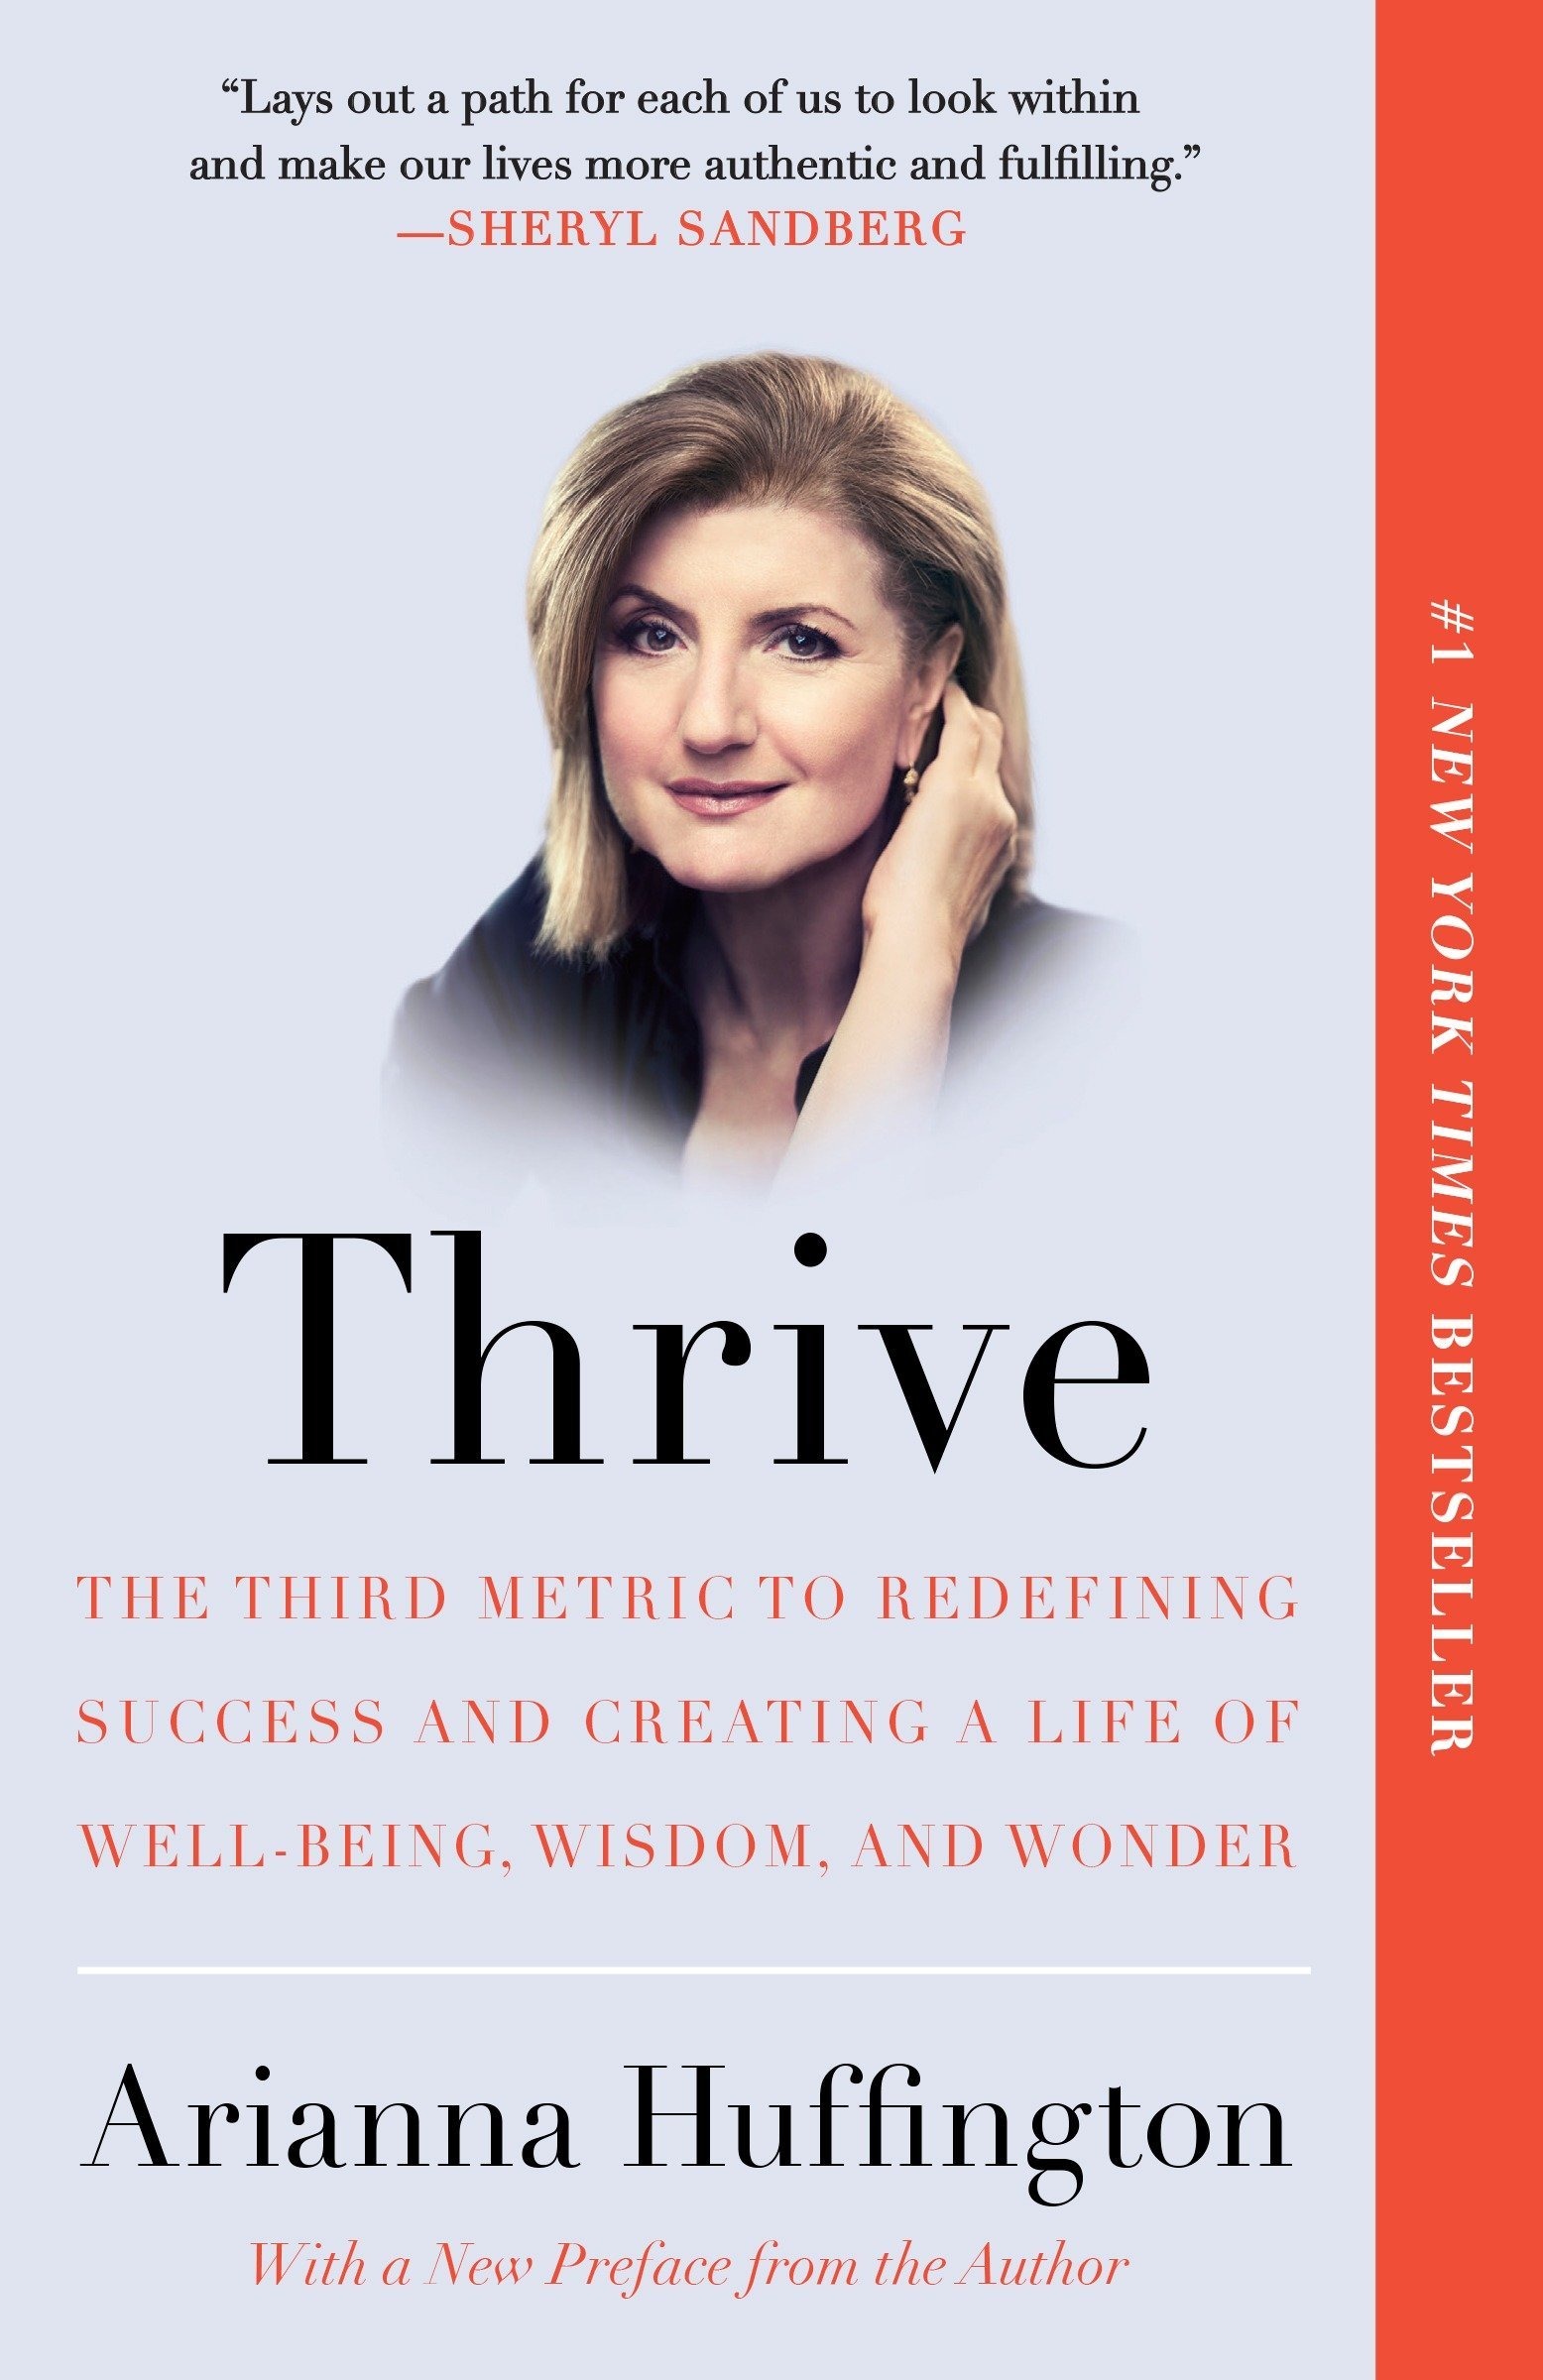 Thrive book cover by Arriana Huffington